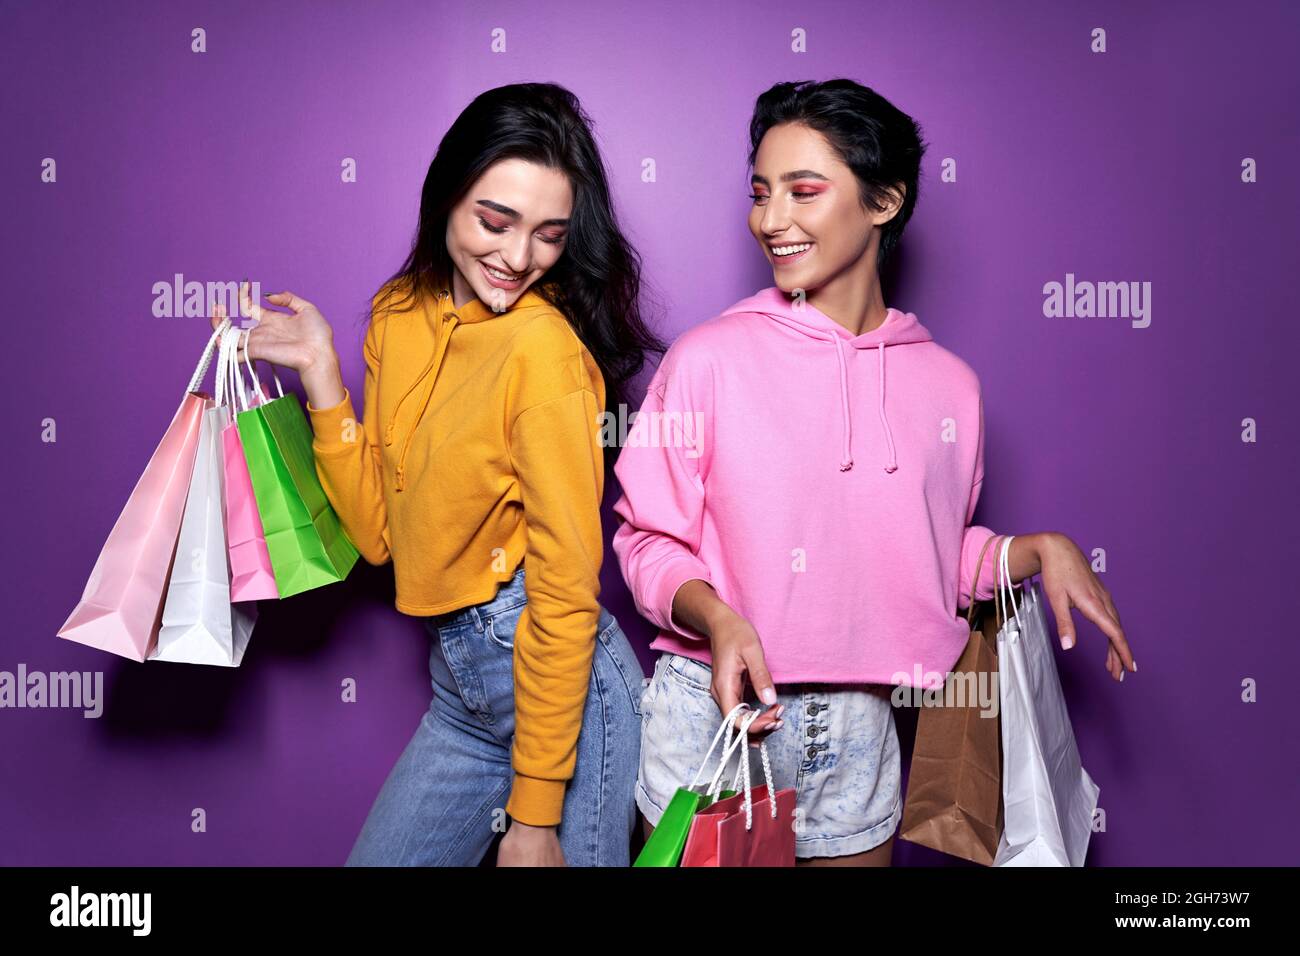 Two happy girls friends shoppers holding shopping bags on purple background. Stock Photo